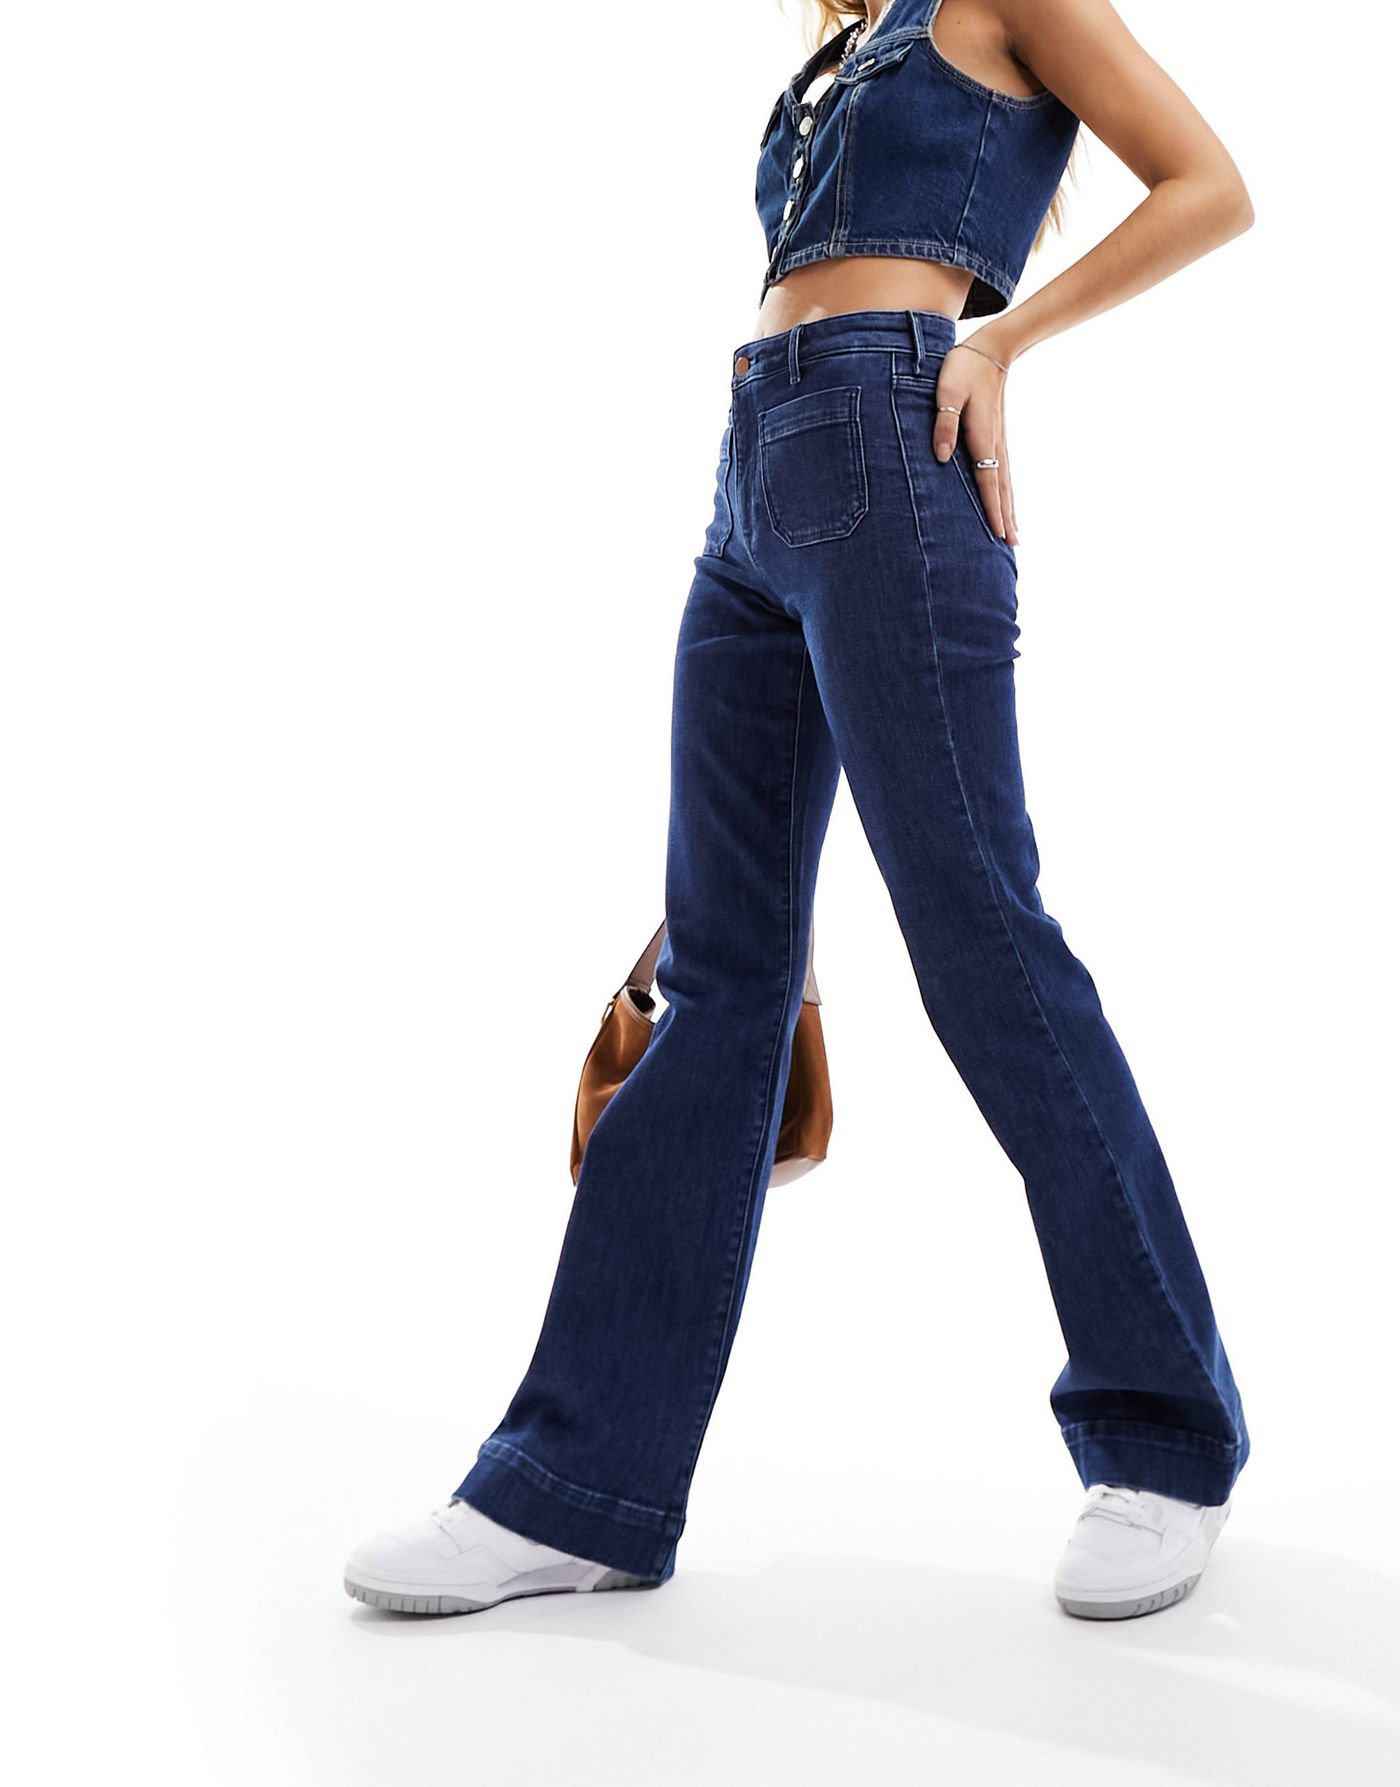 Wrangler flared jean in dark blue with front pockets 